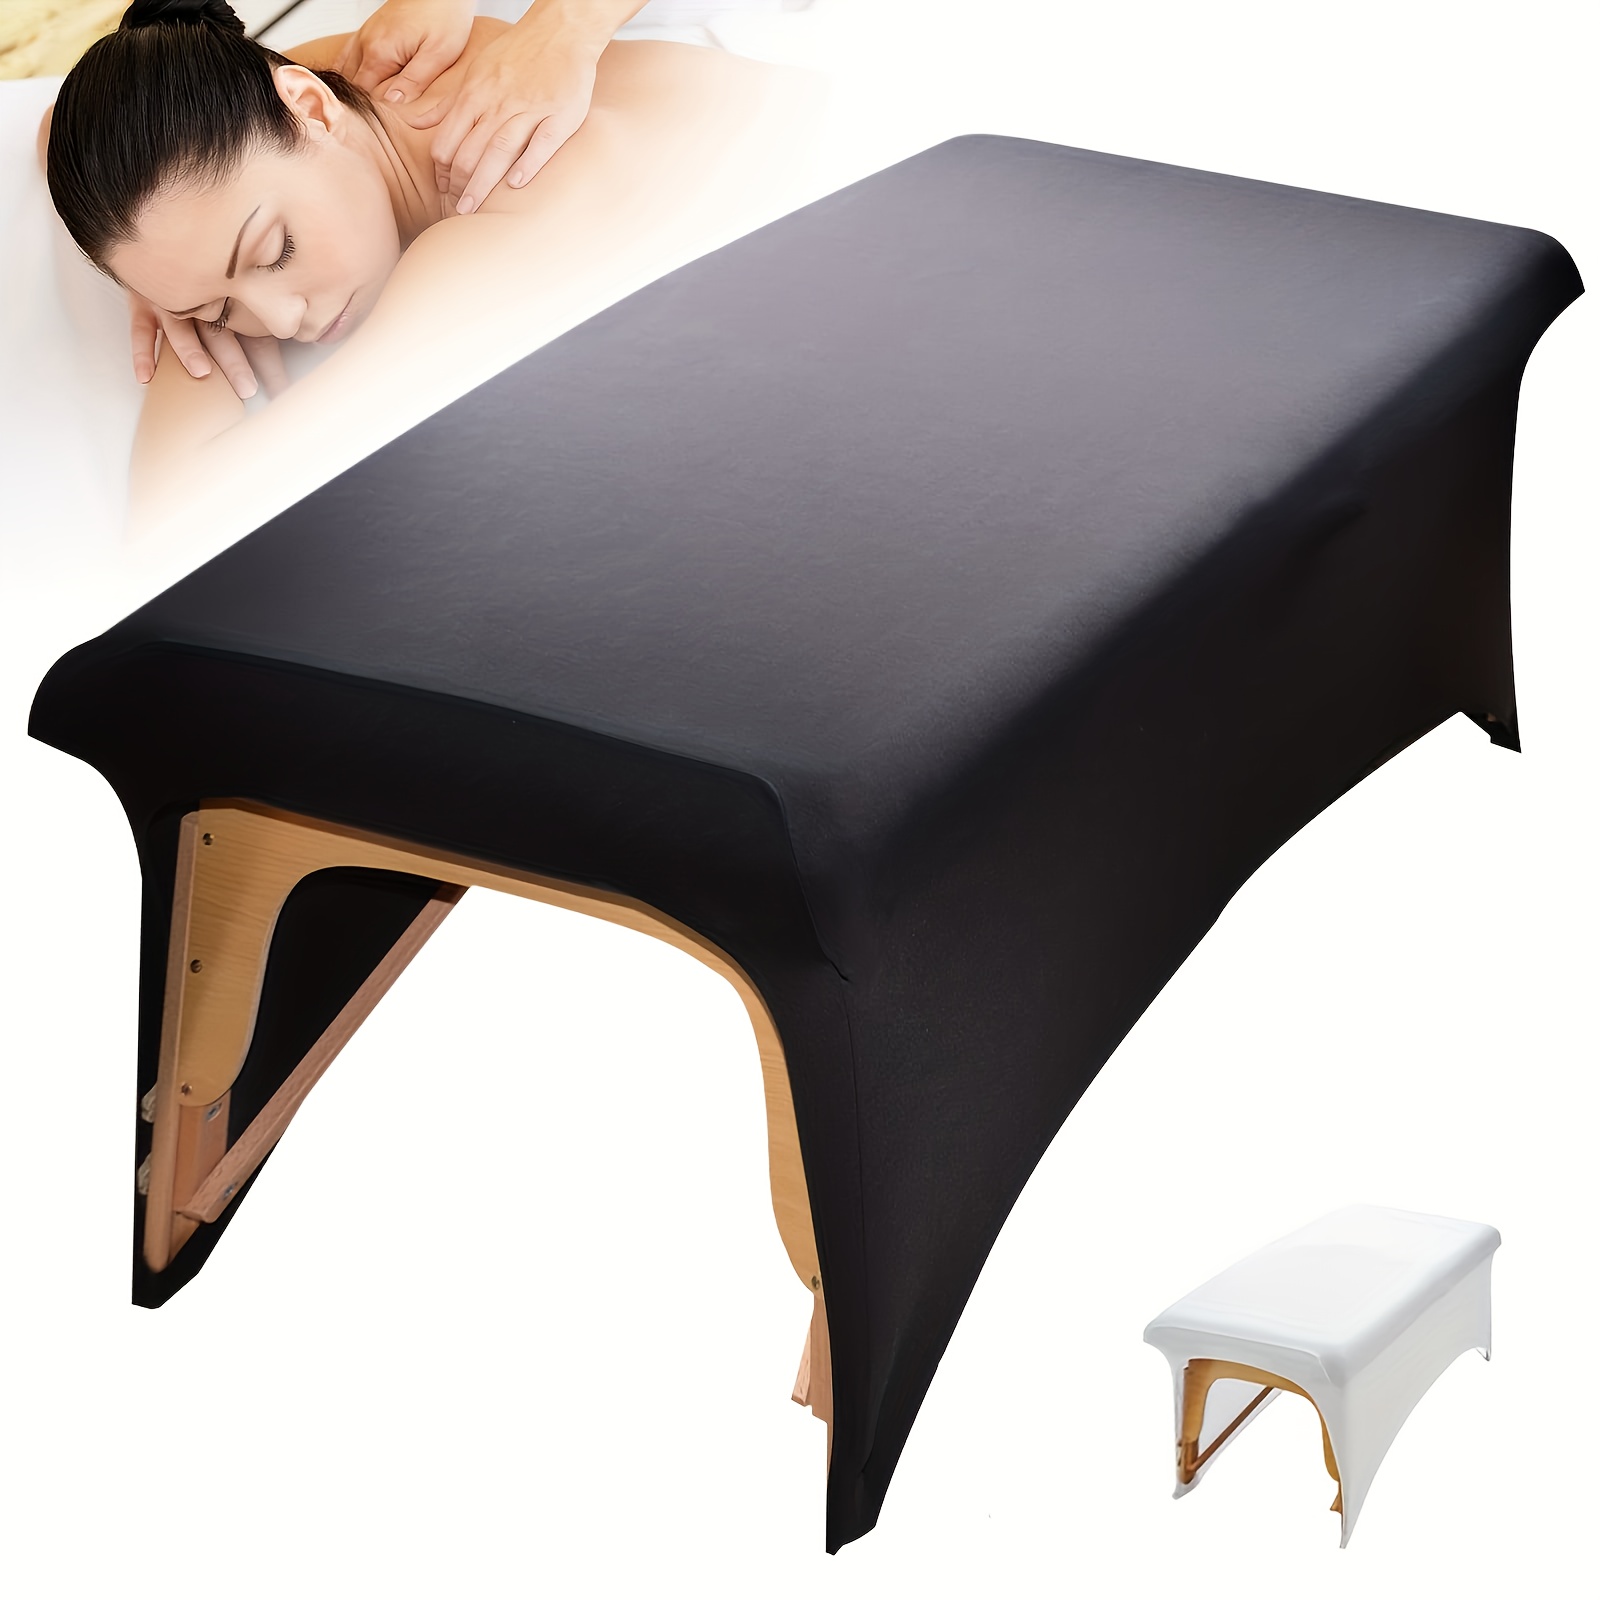 

1pc Bed Cover For Eyelash Extensions, Stretchy Massage Bed Cover Fitted Spa Table Or Esthetician Bed, Excellent For Professionals